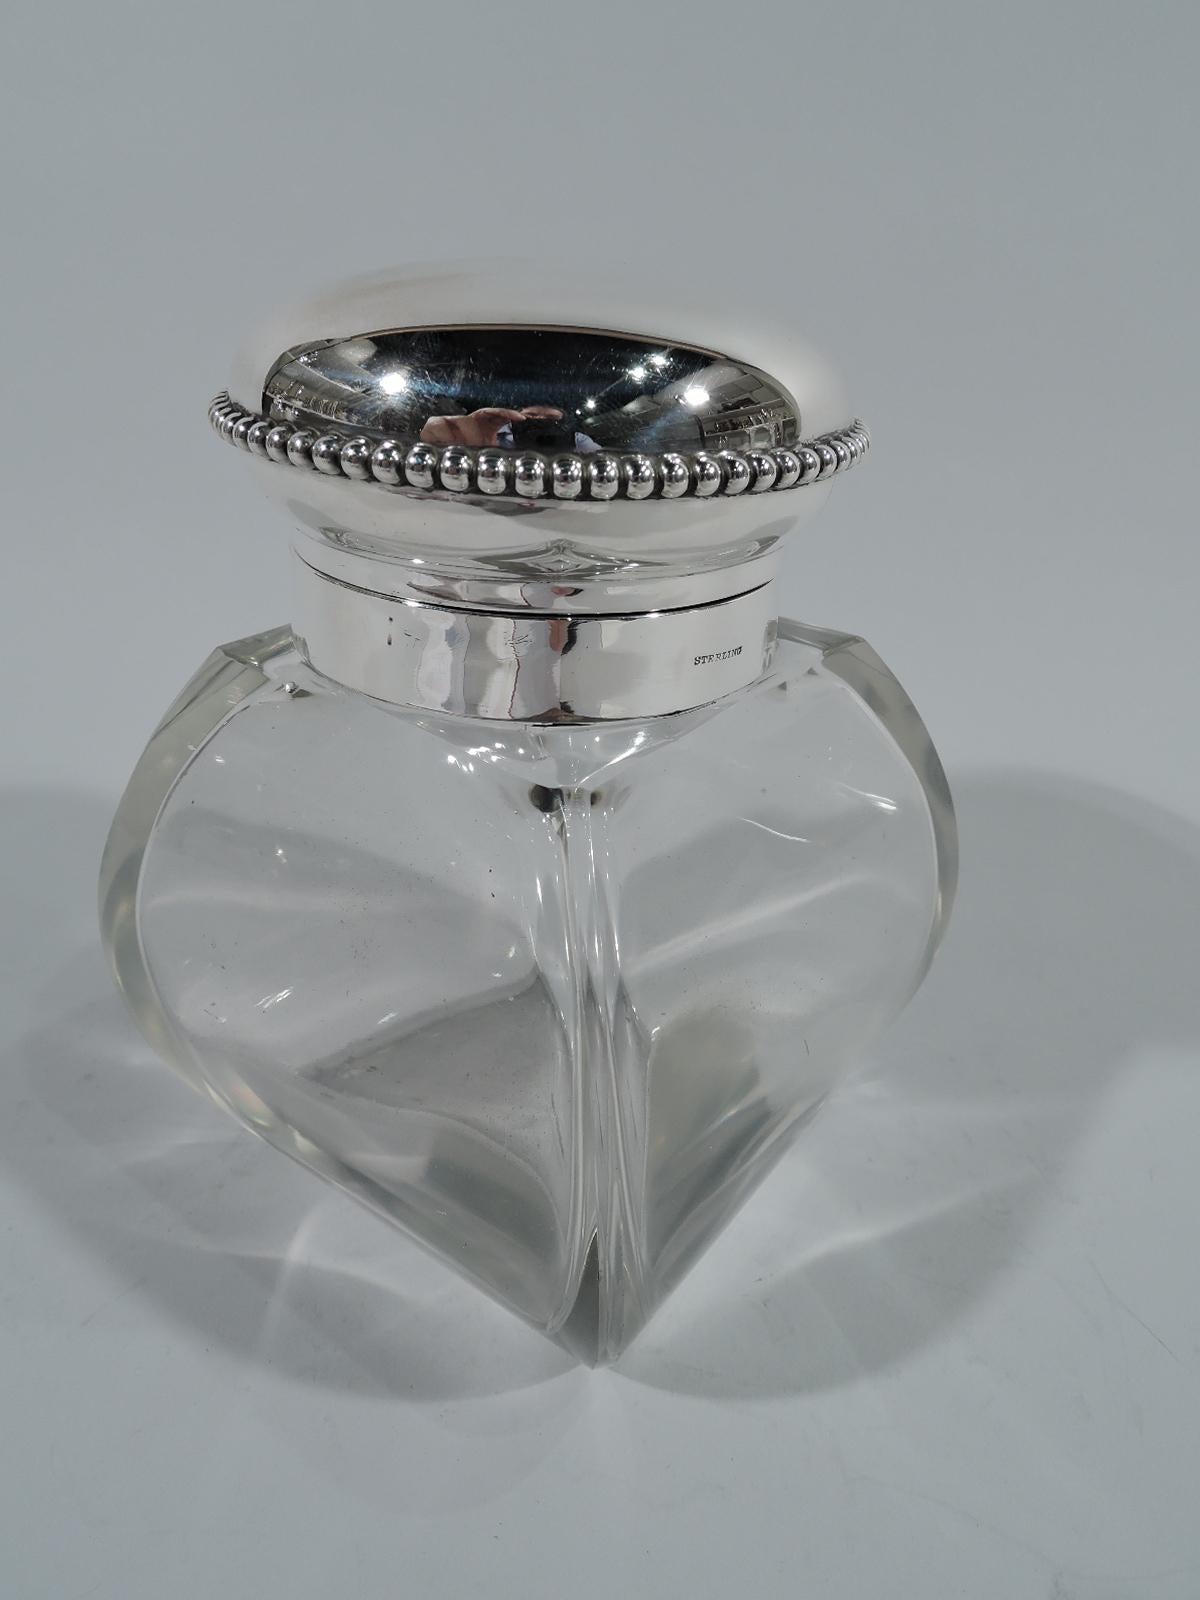 American Edwardian sterling silver and clear glass candy jar. Four-sided and bombe bowl with star cut to underside. Short neck in sterling silver collar and hinged and beaded cover (also sterling silver). Hallmarked Goodnow & Jenks, who were active